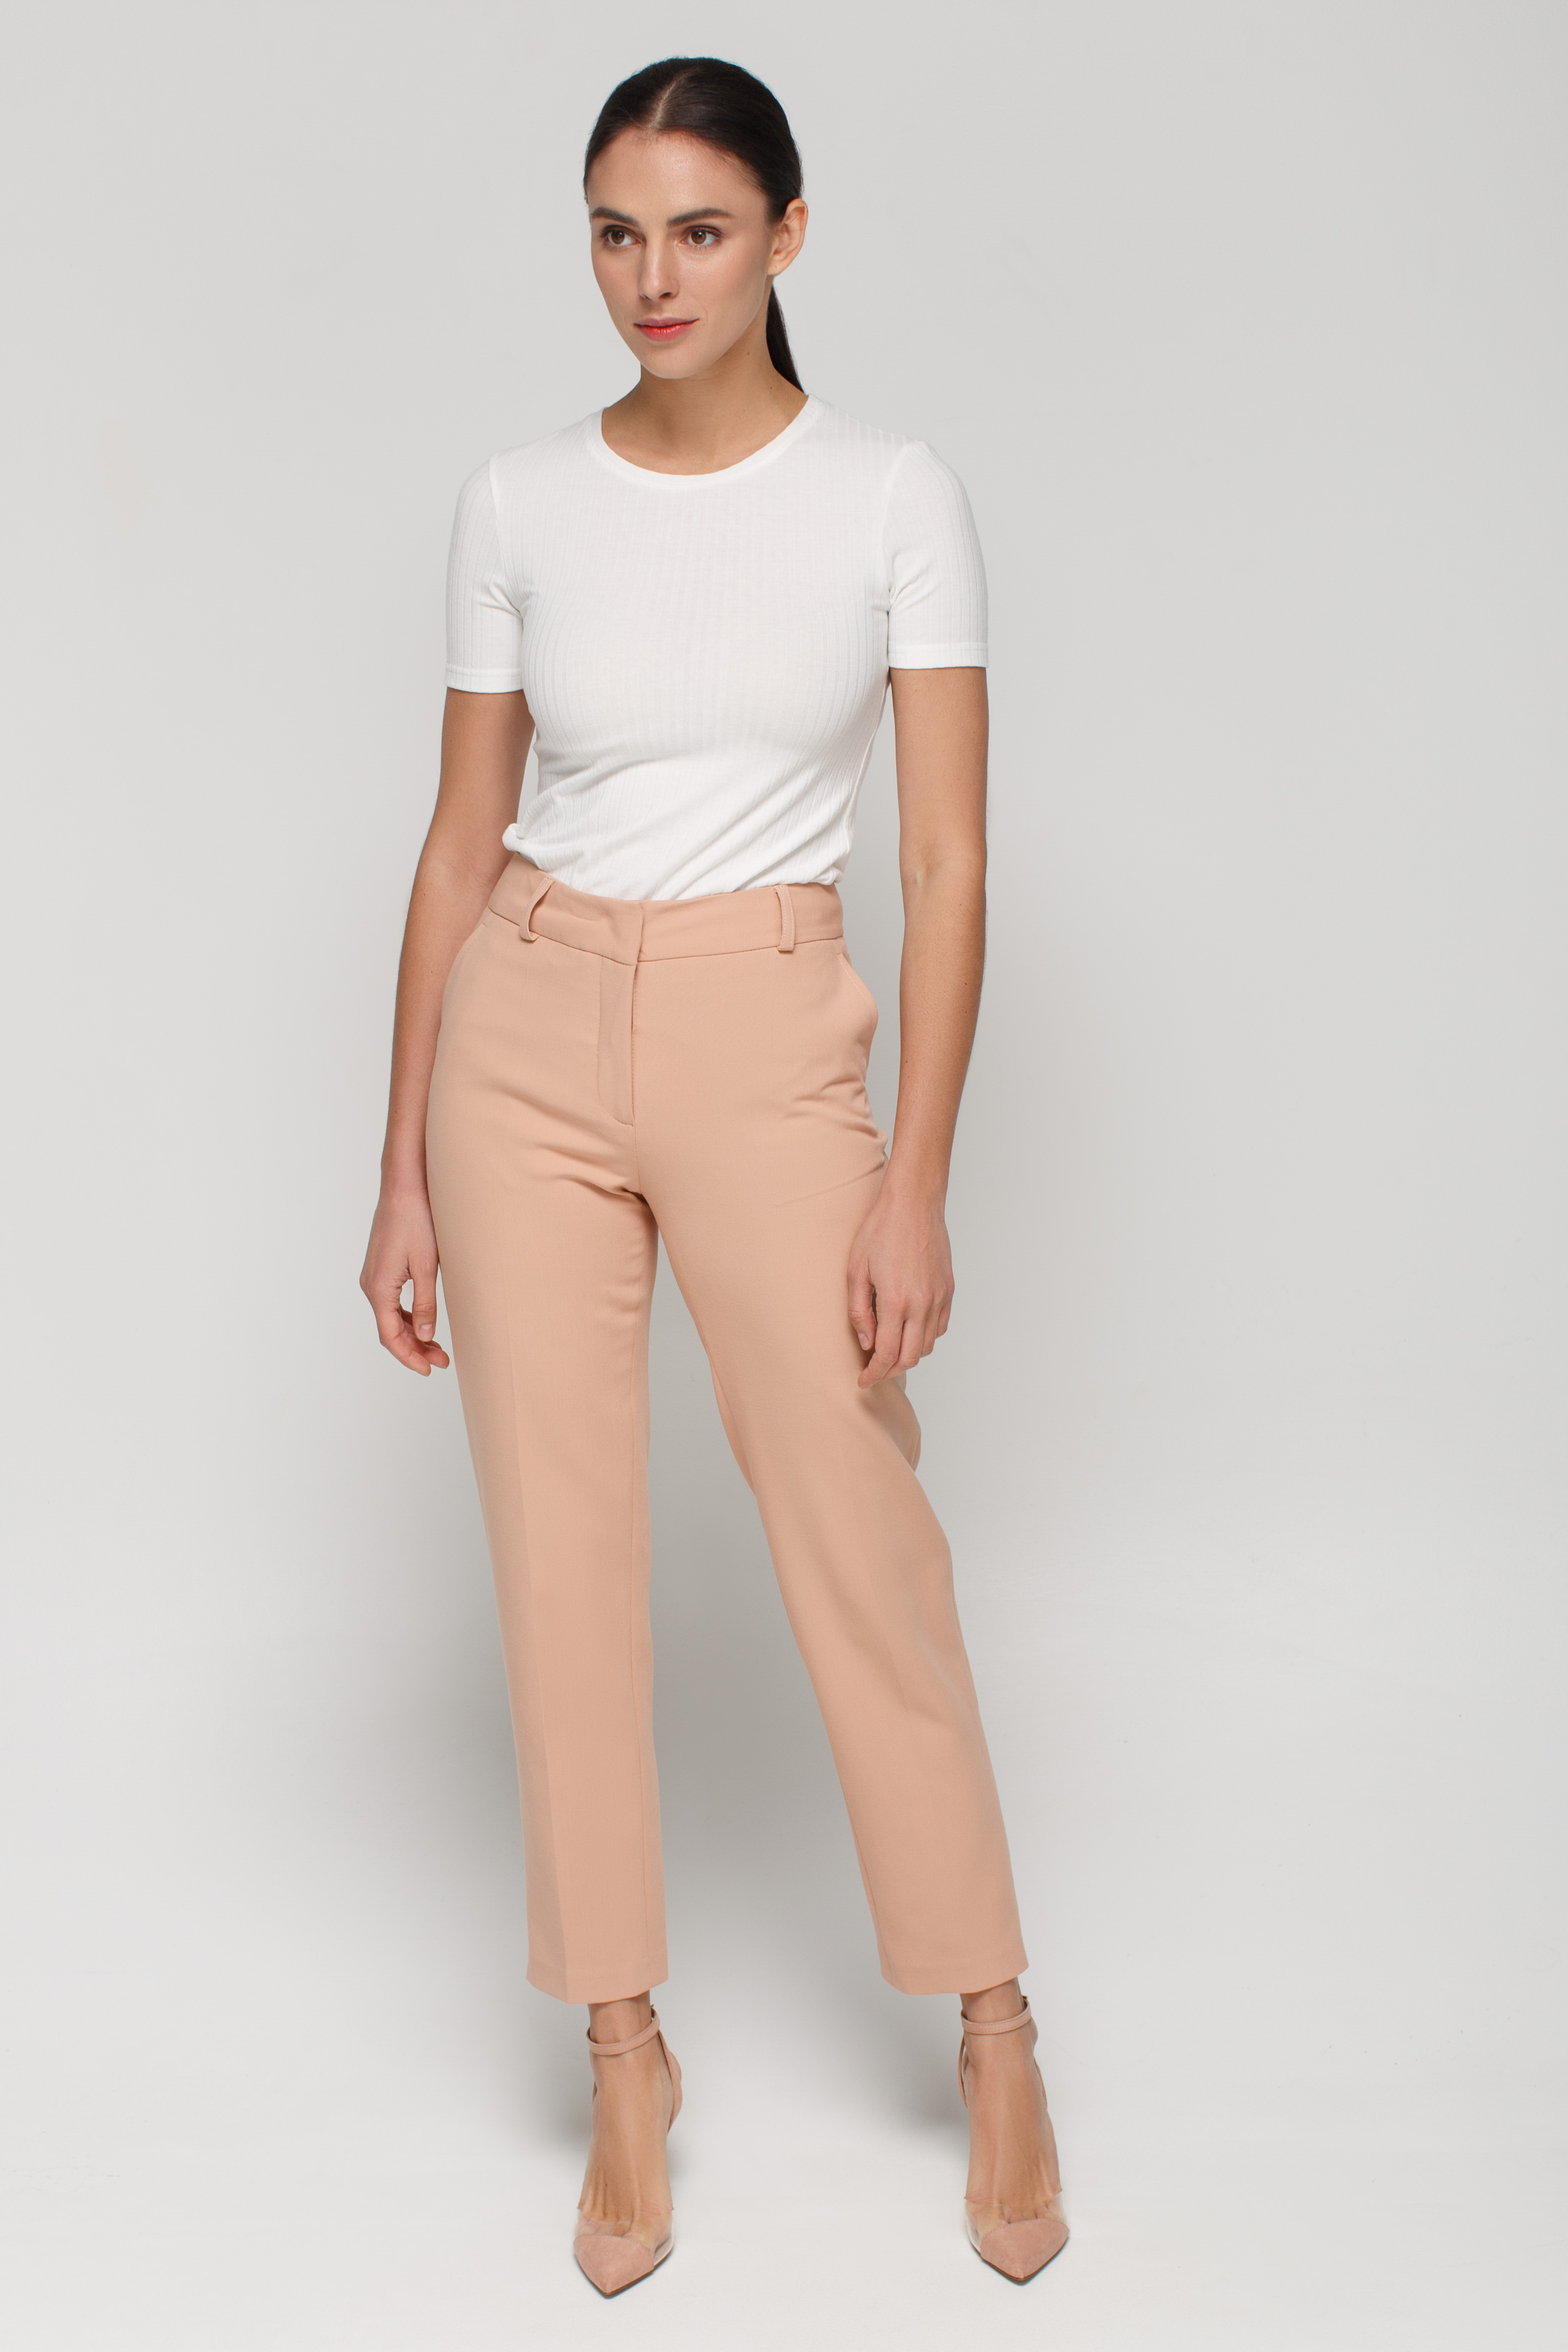 Beige trousers tapered to the bottom, photo 3